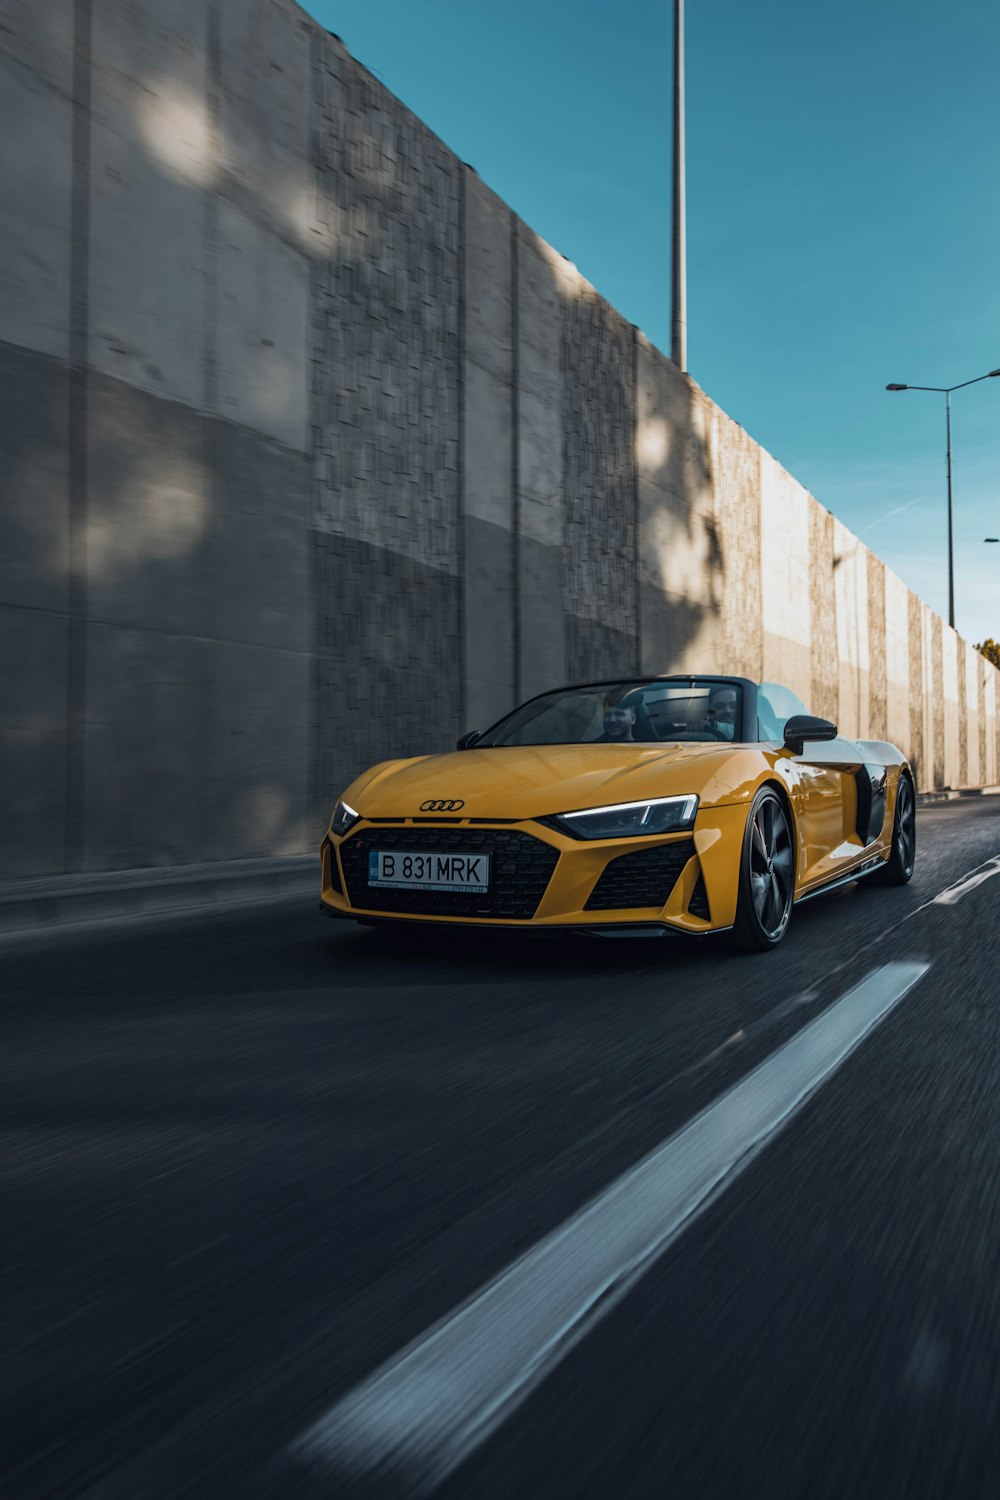 a yellow sports car on a road